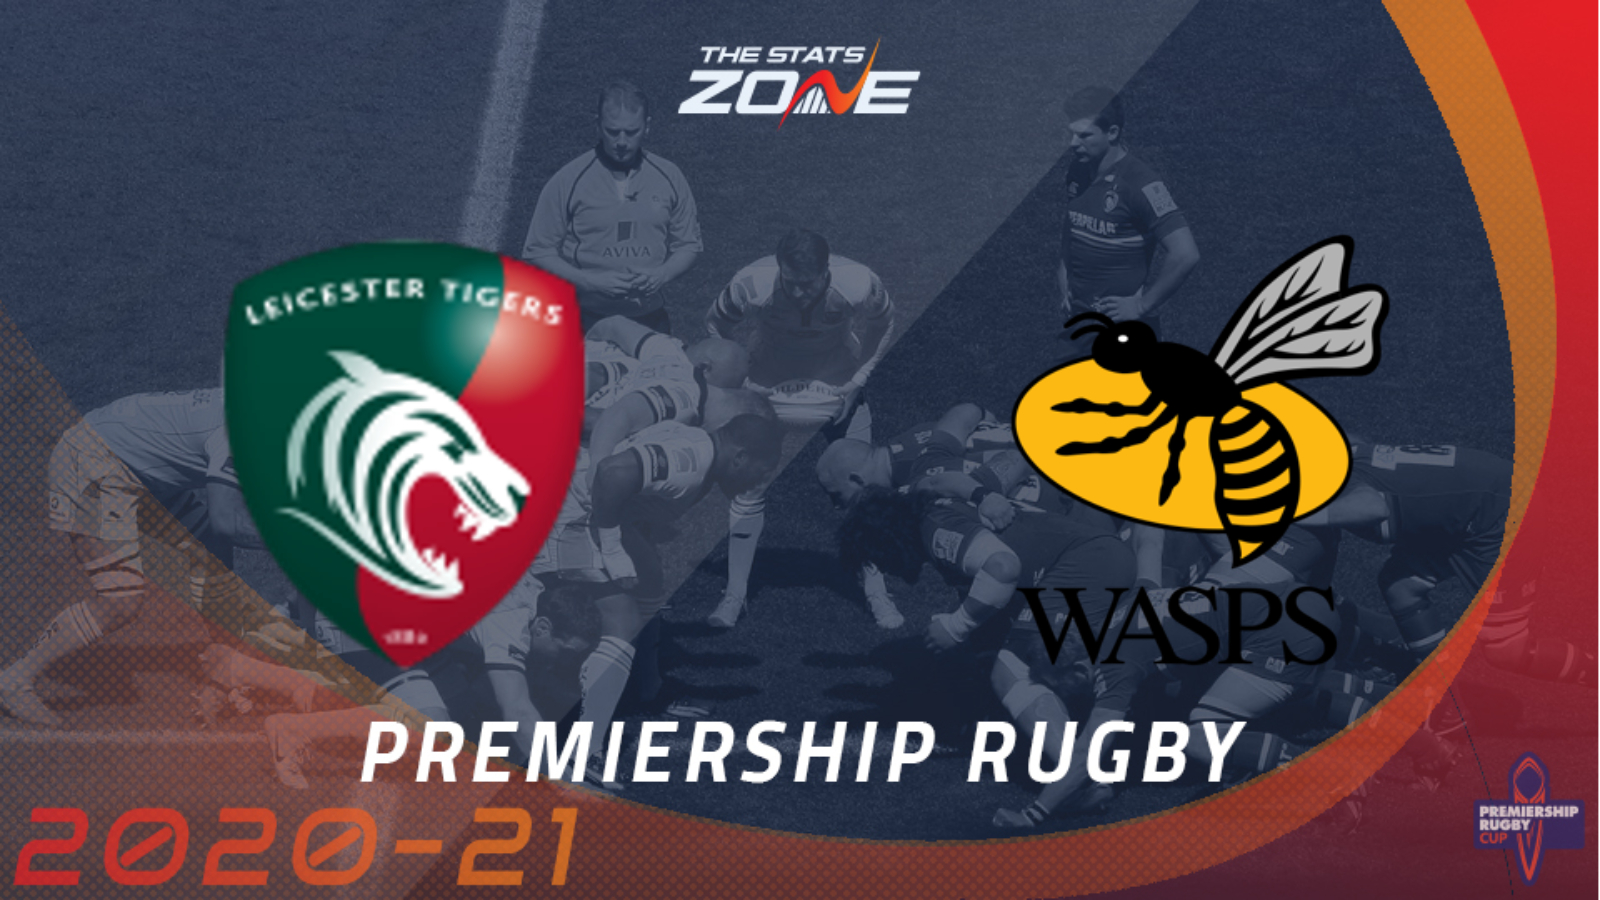 live stream leicester tigers